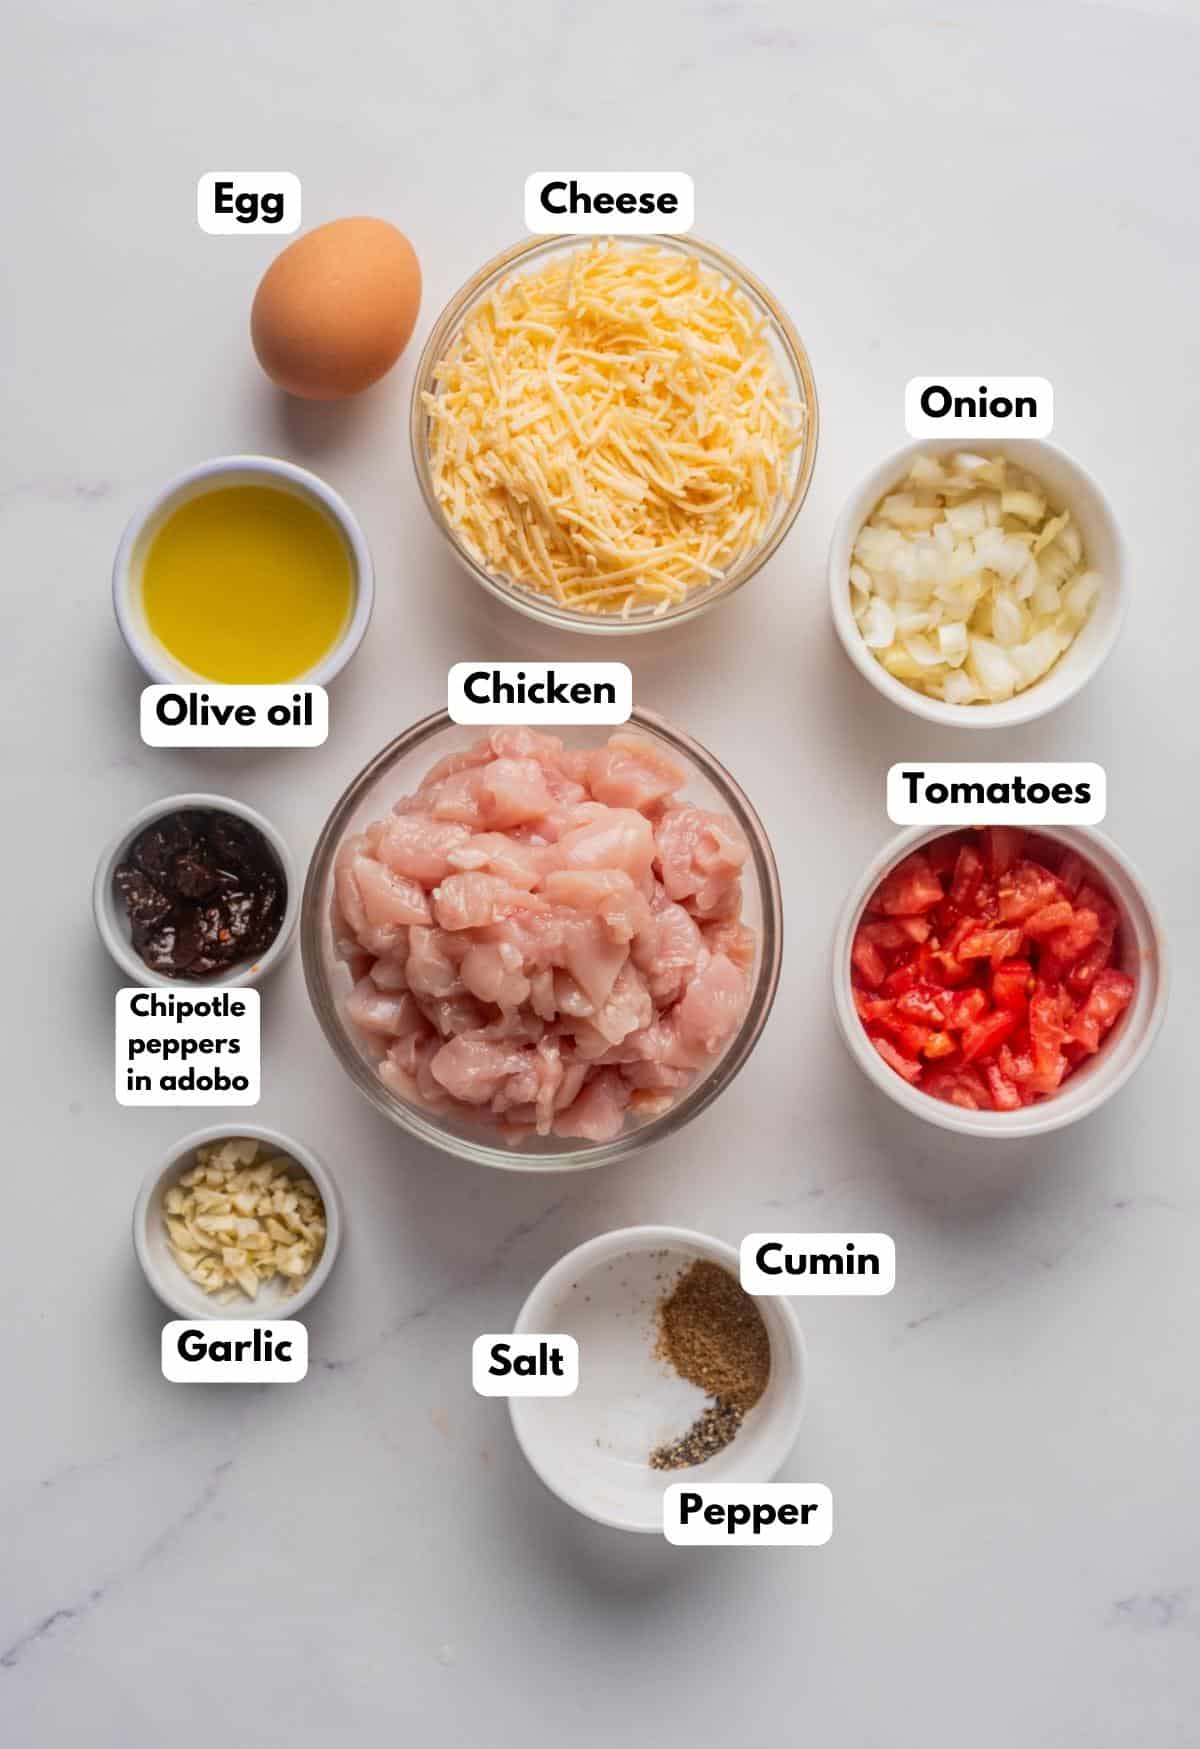 The ingredients to make the filling.